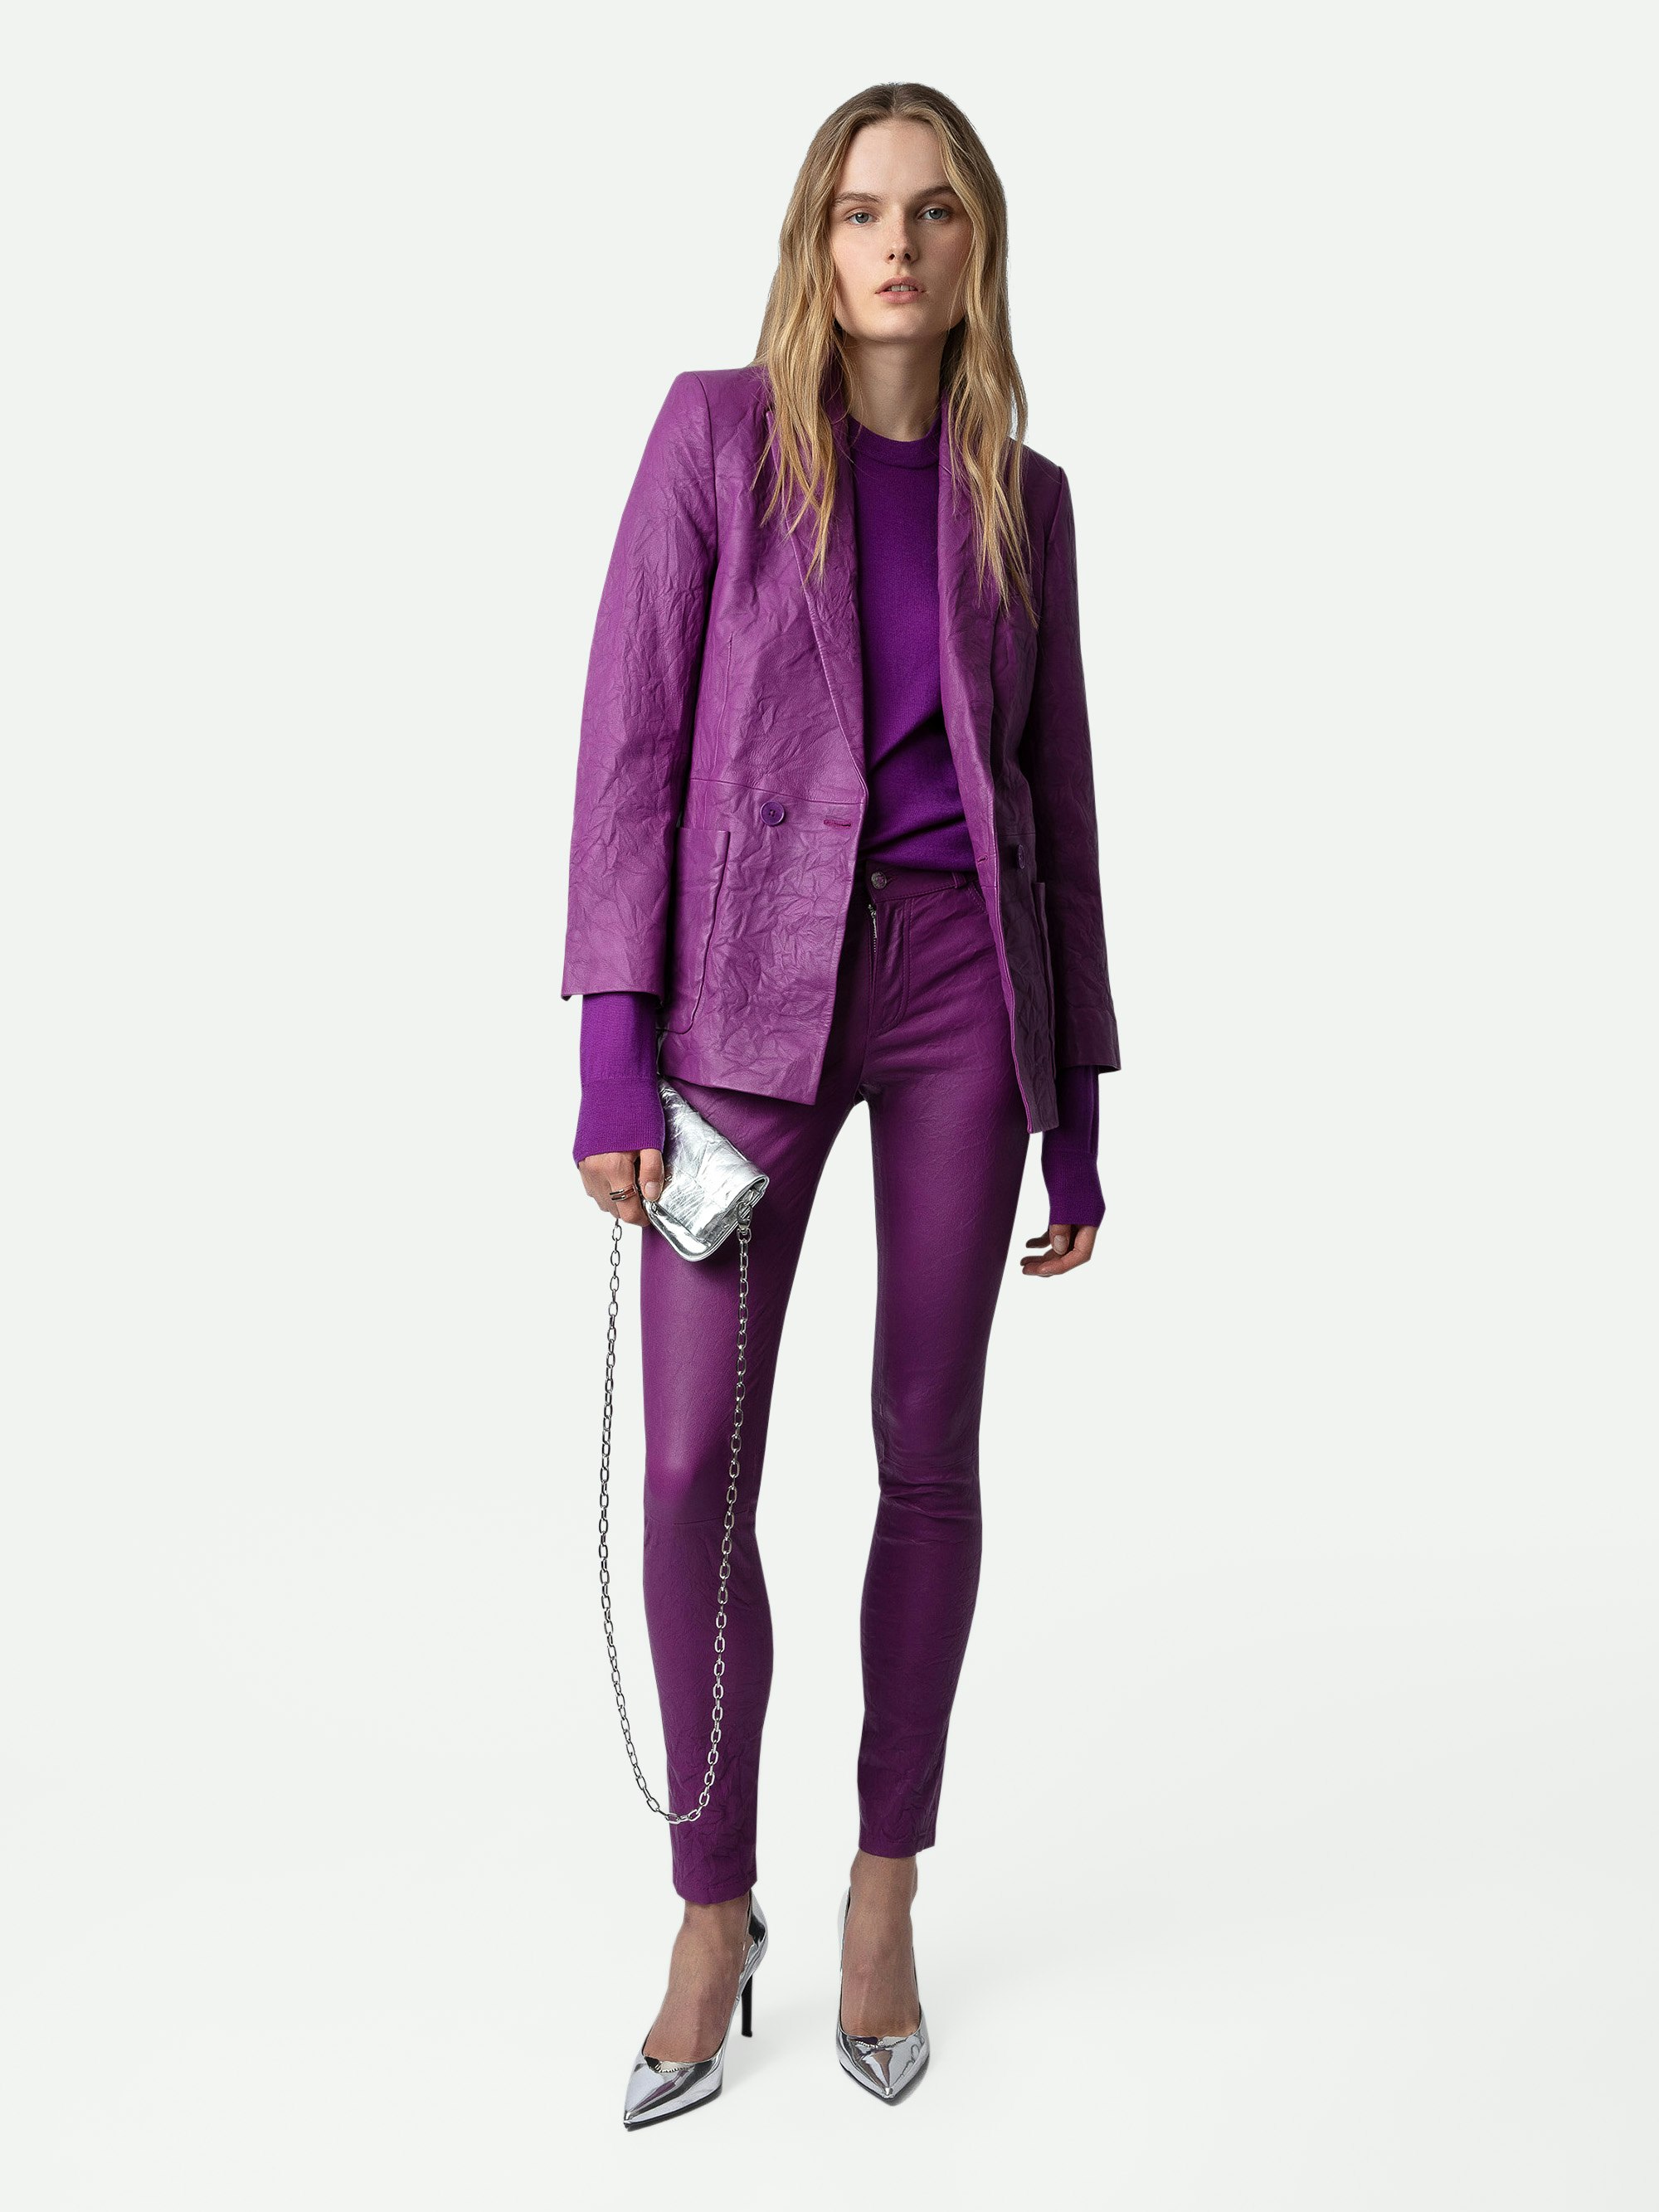 Phlame Crinkled Leather Trousers - Purple crinkled leather trousers with pockets.